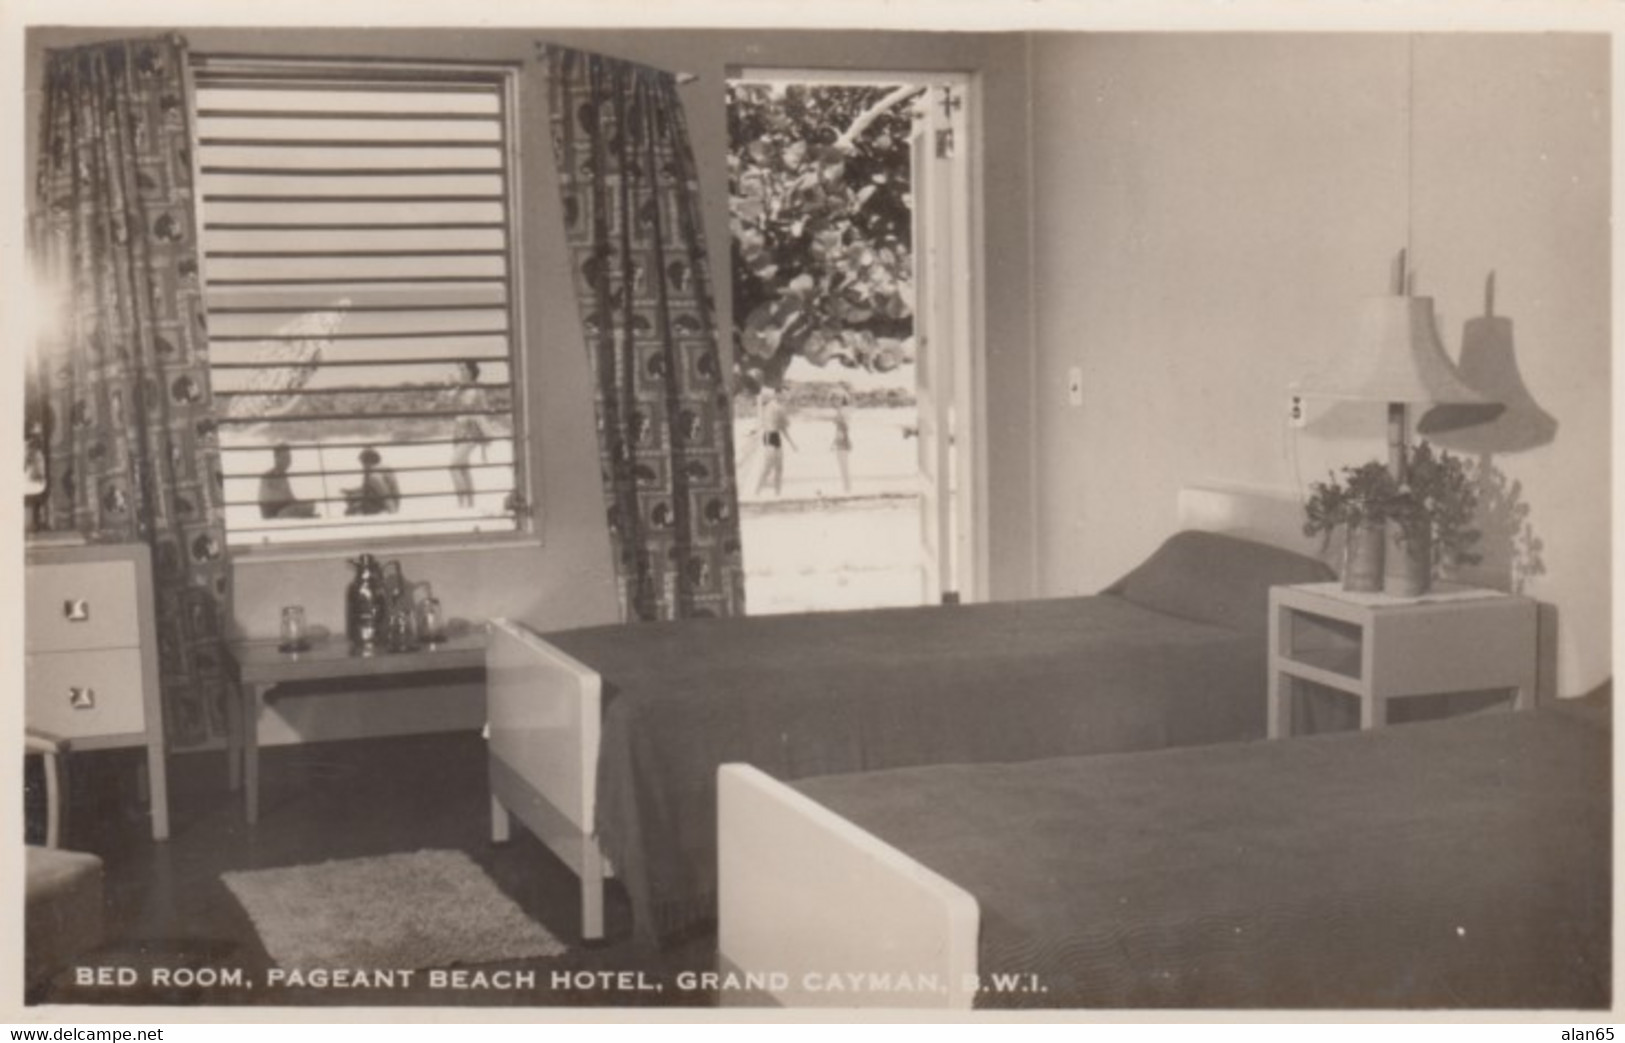 Grand Cayman BWI, Pageant Beach Hotel Bedroom Interior View, C1940s/50s Vintage Real Photo Postcard - Cayman Islands